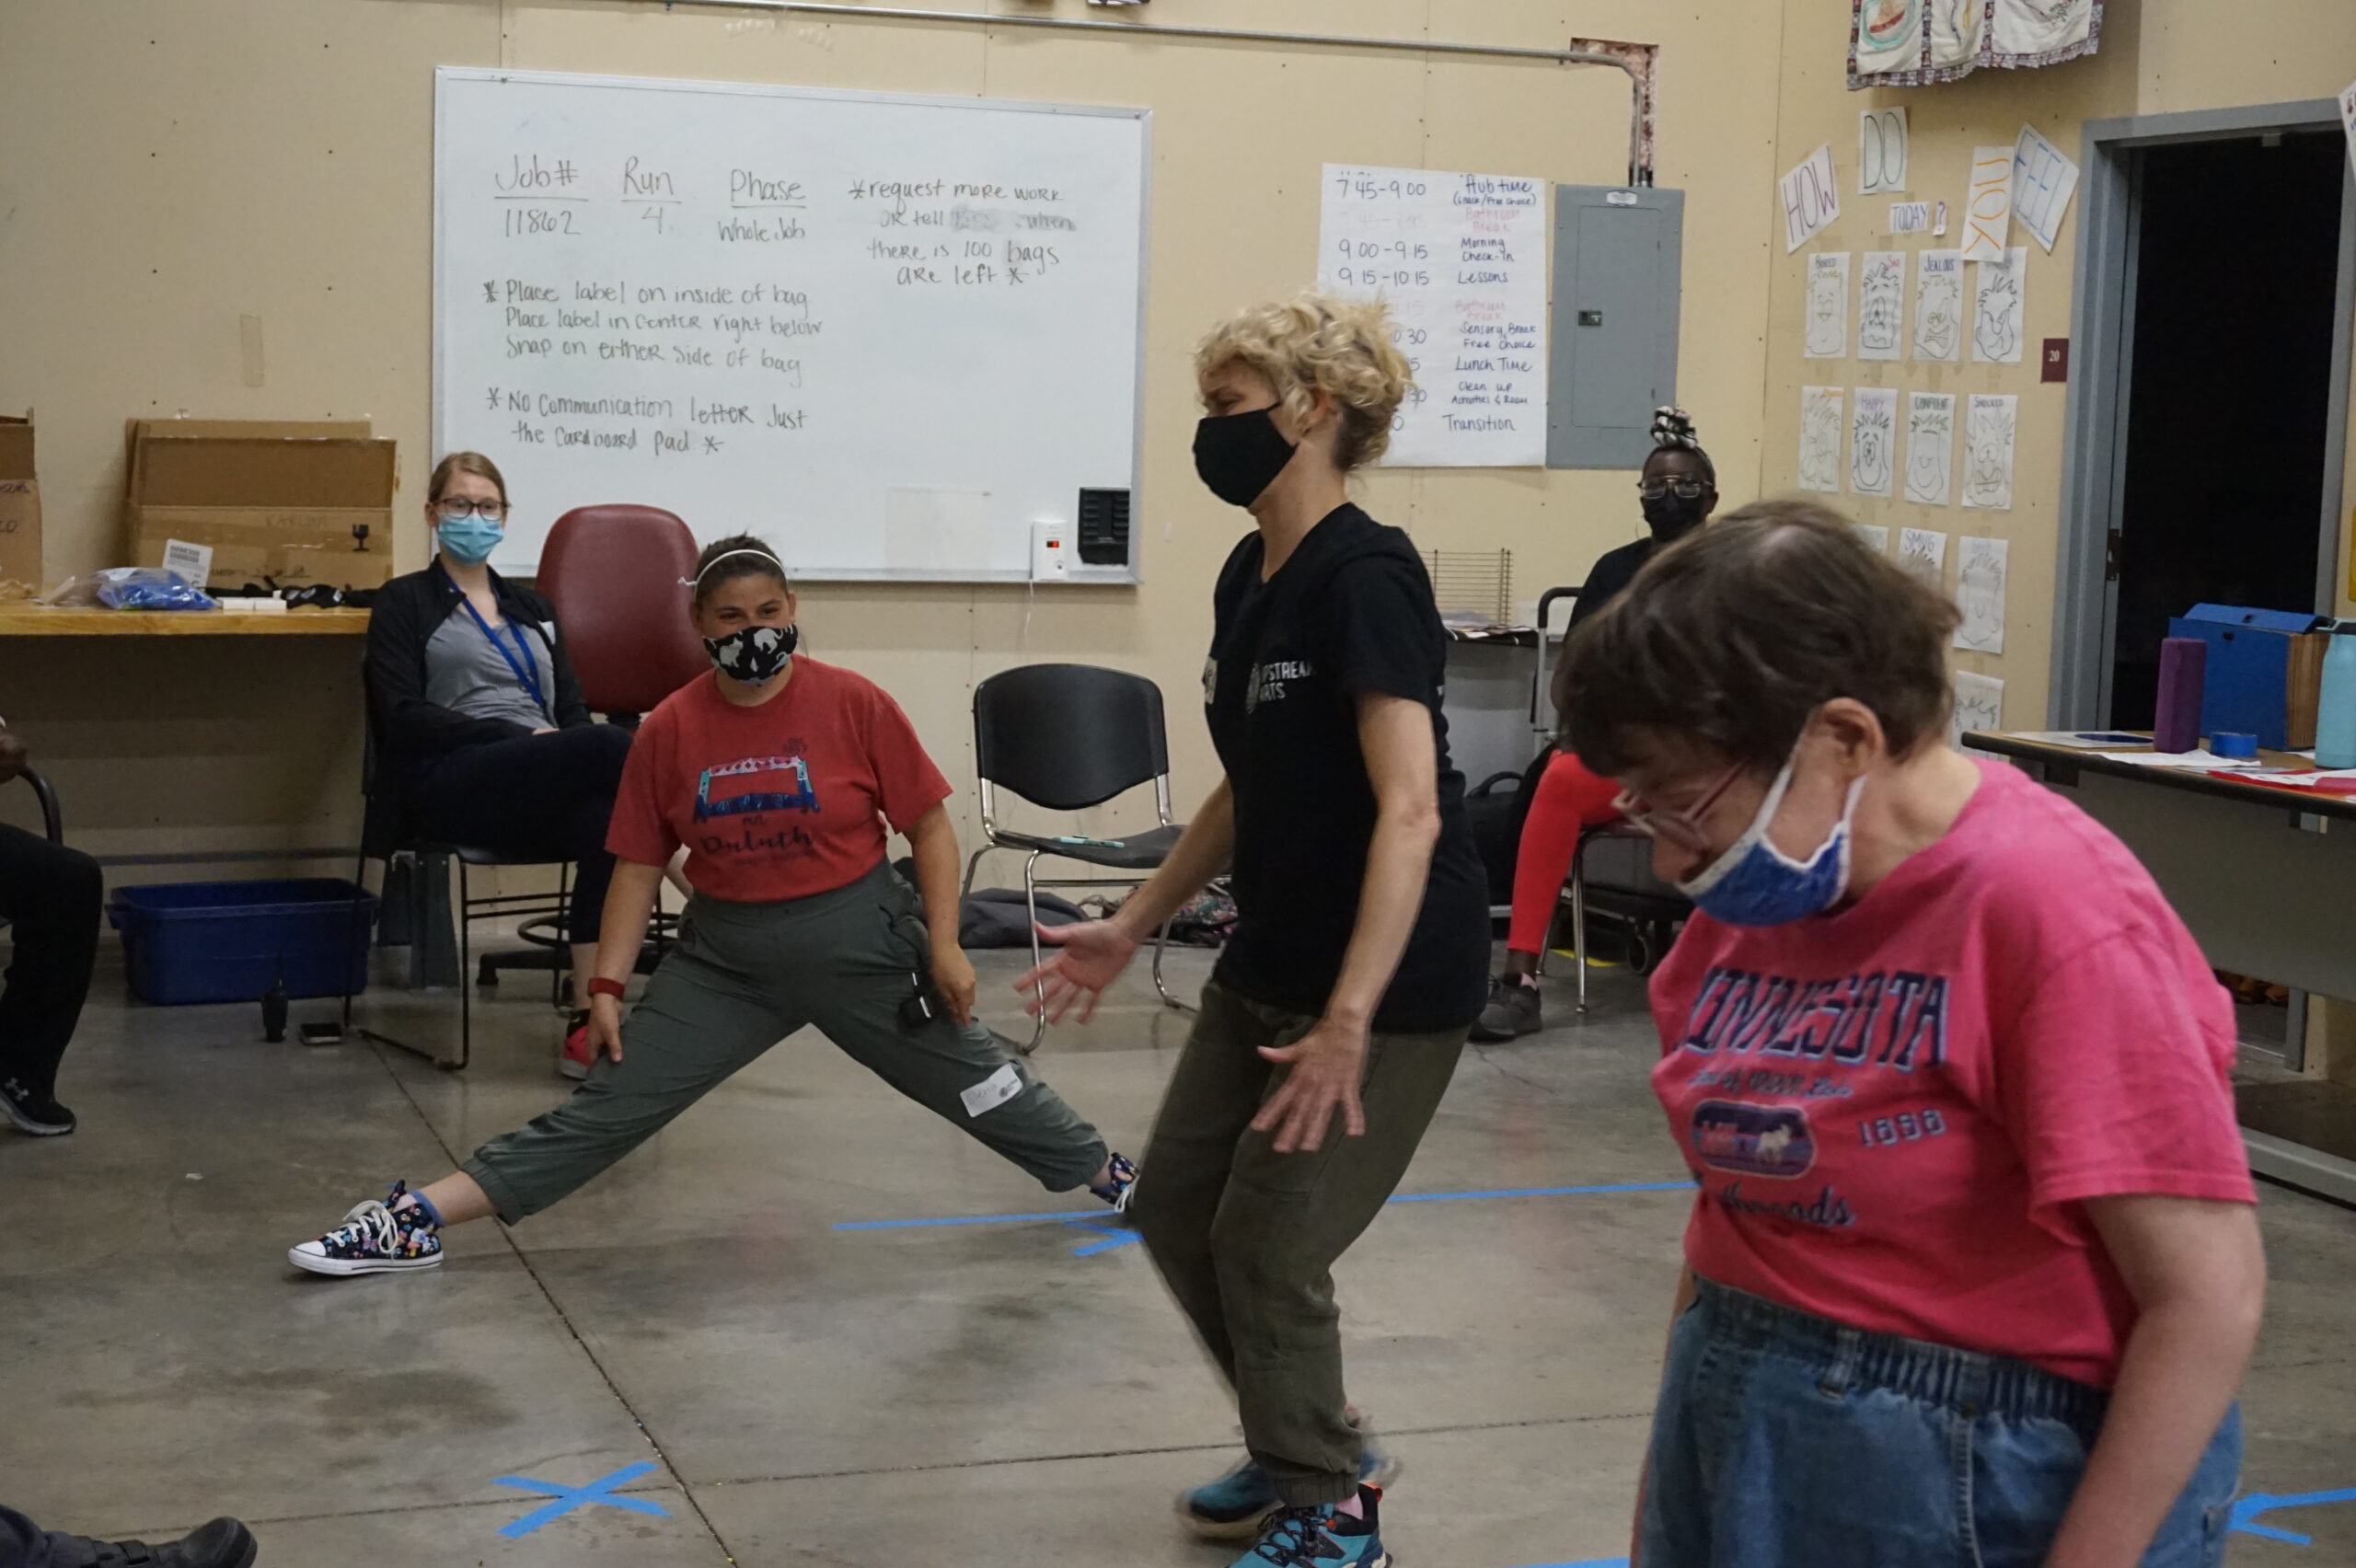 In a classroom, Teaching Artist Tracey, a white woman with blond wavy hair, freezes in place along with two adult participants, one doing the splits and the other looking downwards. Everyone is masked.